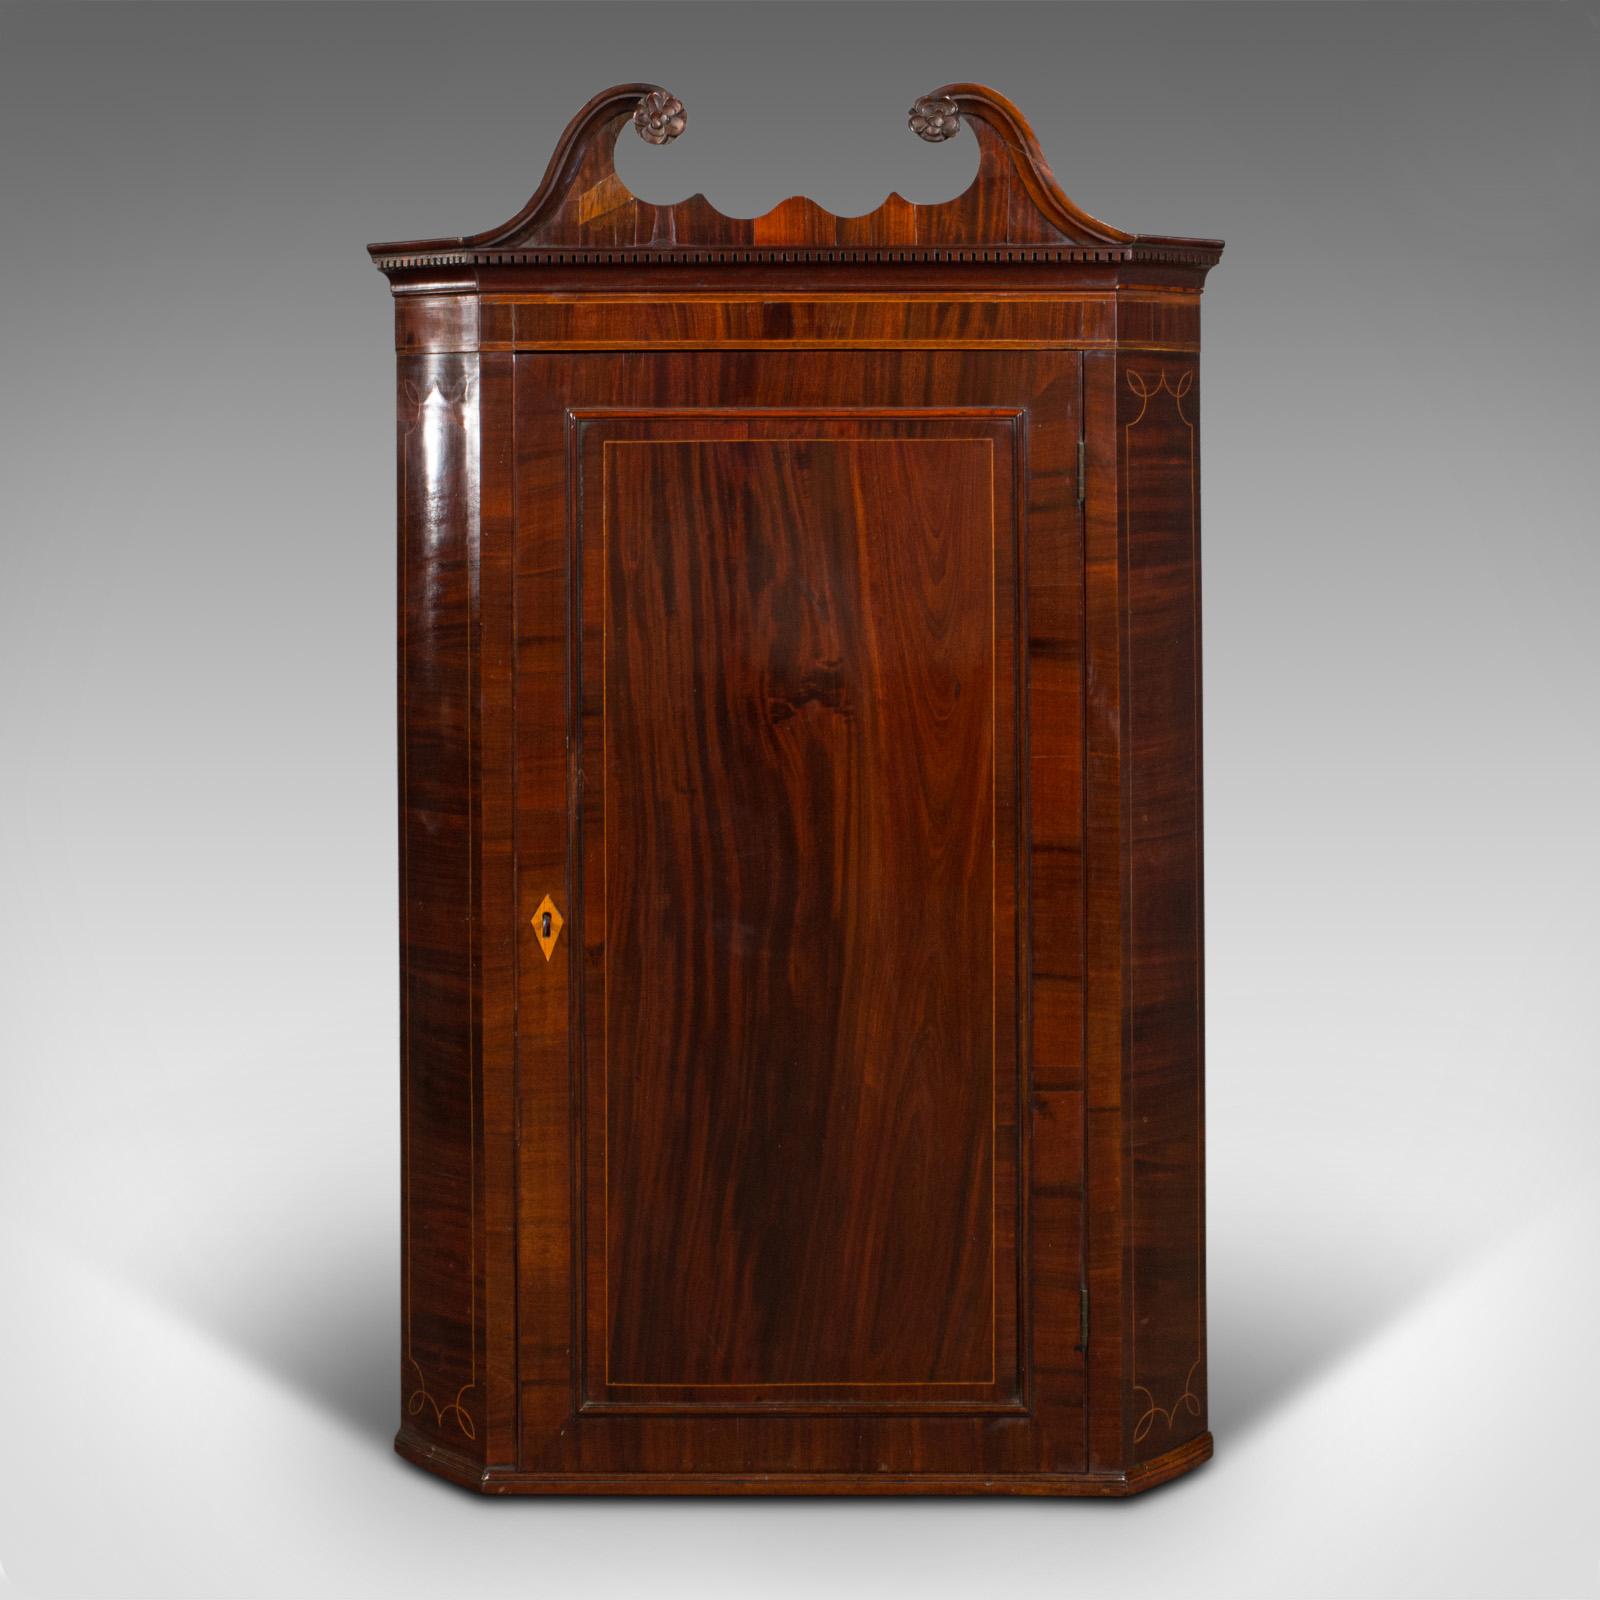 This is an antique corner cabinet. An English flame mahogany and boxwood inlaid wall cupboard, dating to the Georgian period, circa 1760.

Distinctive corner cupboard graced with fine figuring and colour
Displays a desirable aged patina and in